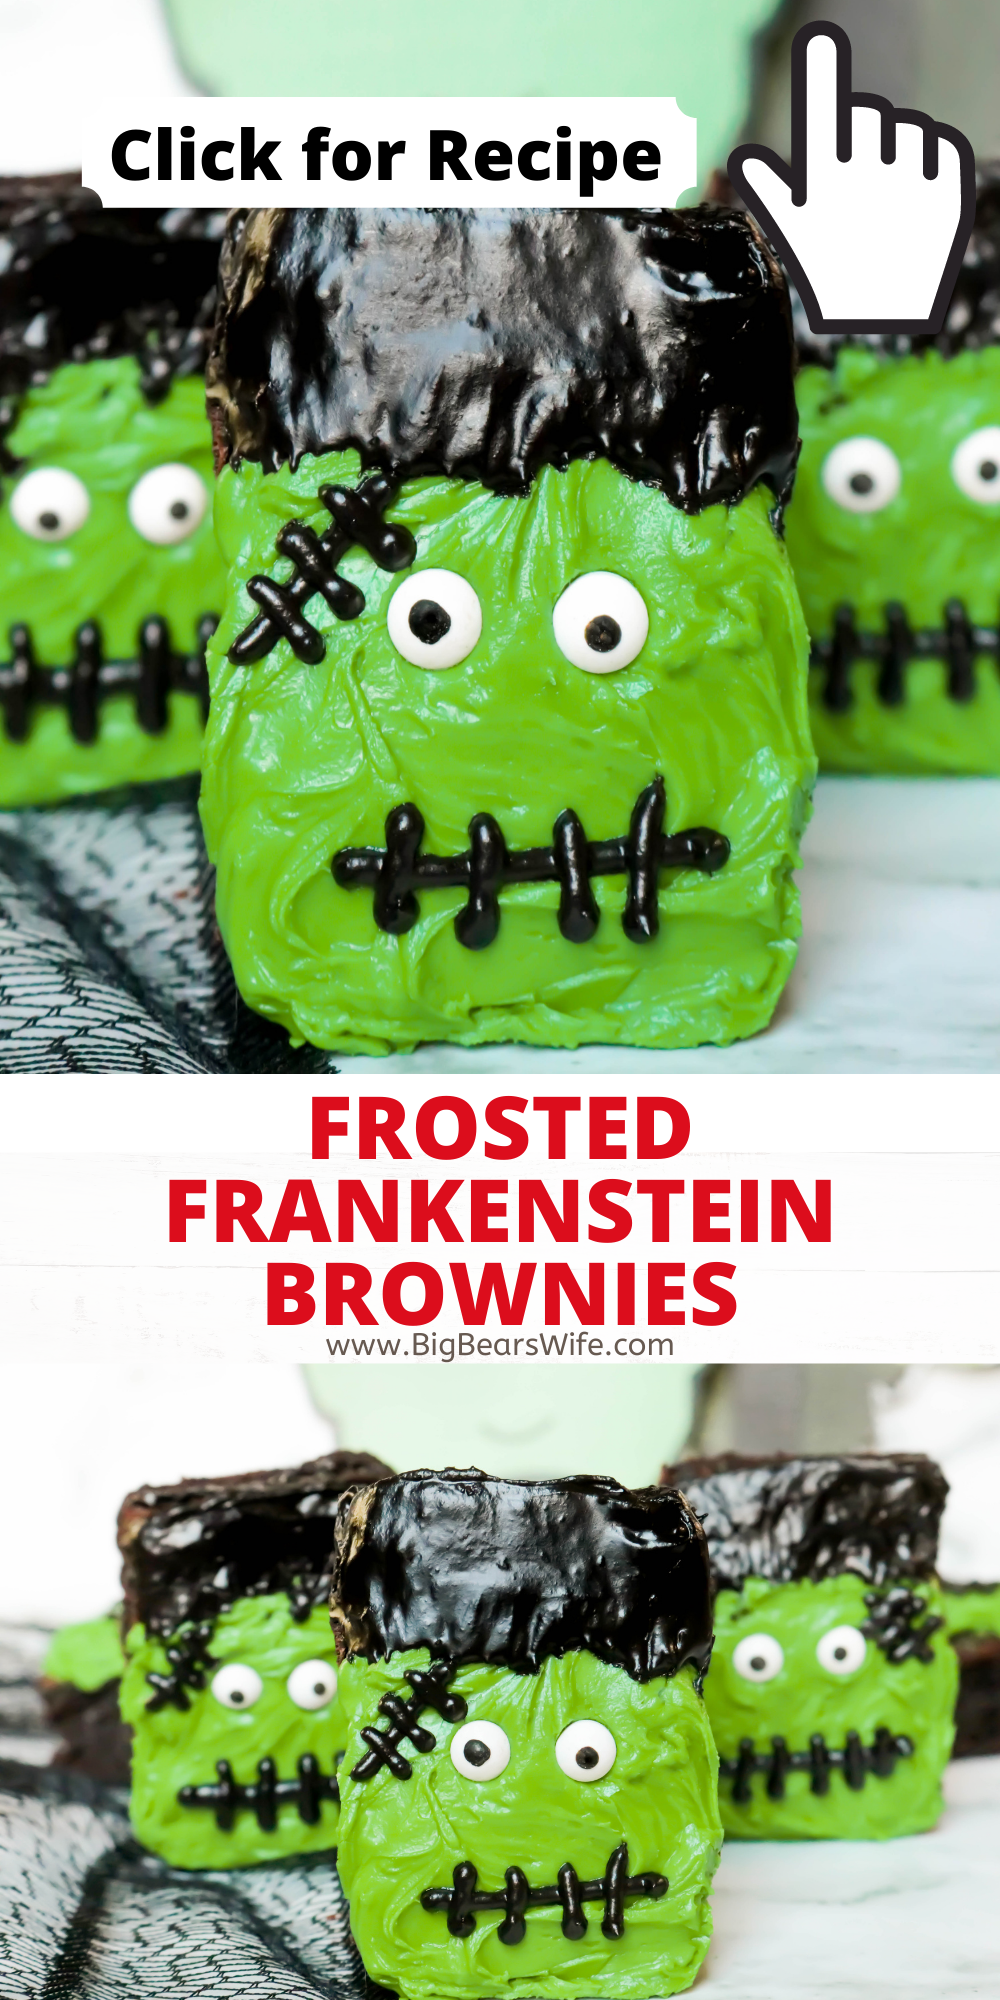 Frosted Frankenstein Brownies are perfect for boxed brownie or homemade brownies with my favorite brownie recipe. Use a bit of frosting and candy eyes to turn brownies into the cutest Halloween brownies. A great simple Halloween dessert recipe that is great for Halloween parties. Also a fun Halloween dessert to make with kids! Use store bought brownies for a quick last minute Halloween treat! via @bigbearswife